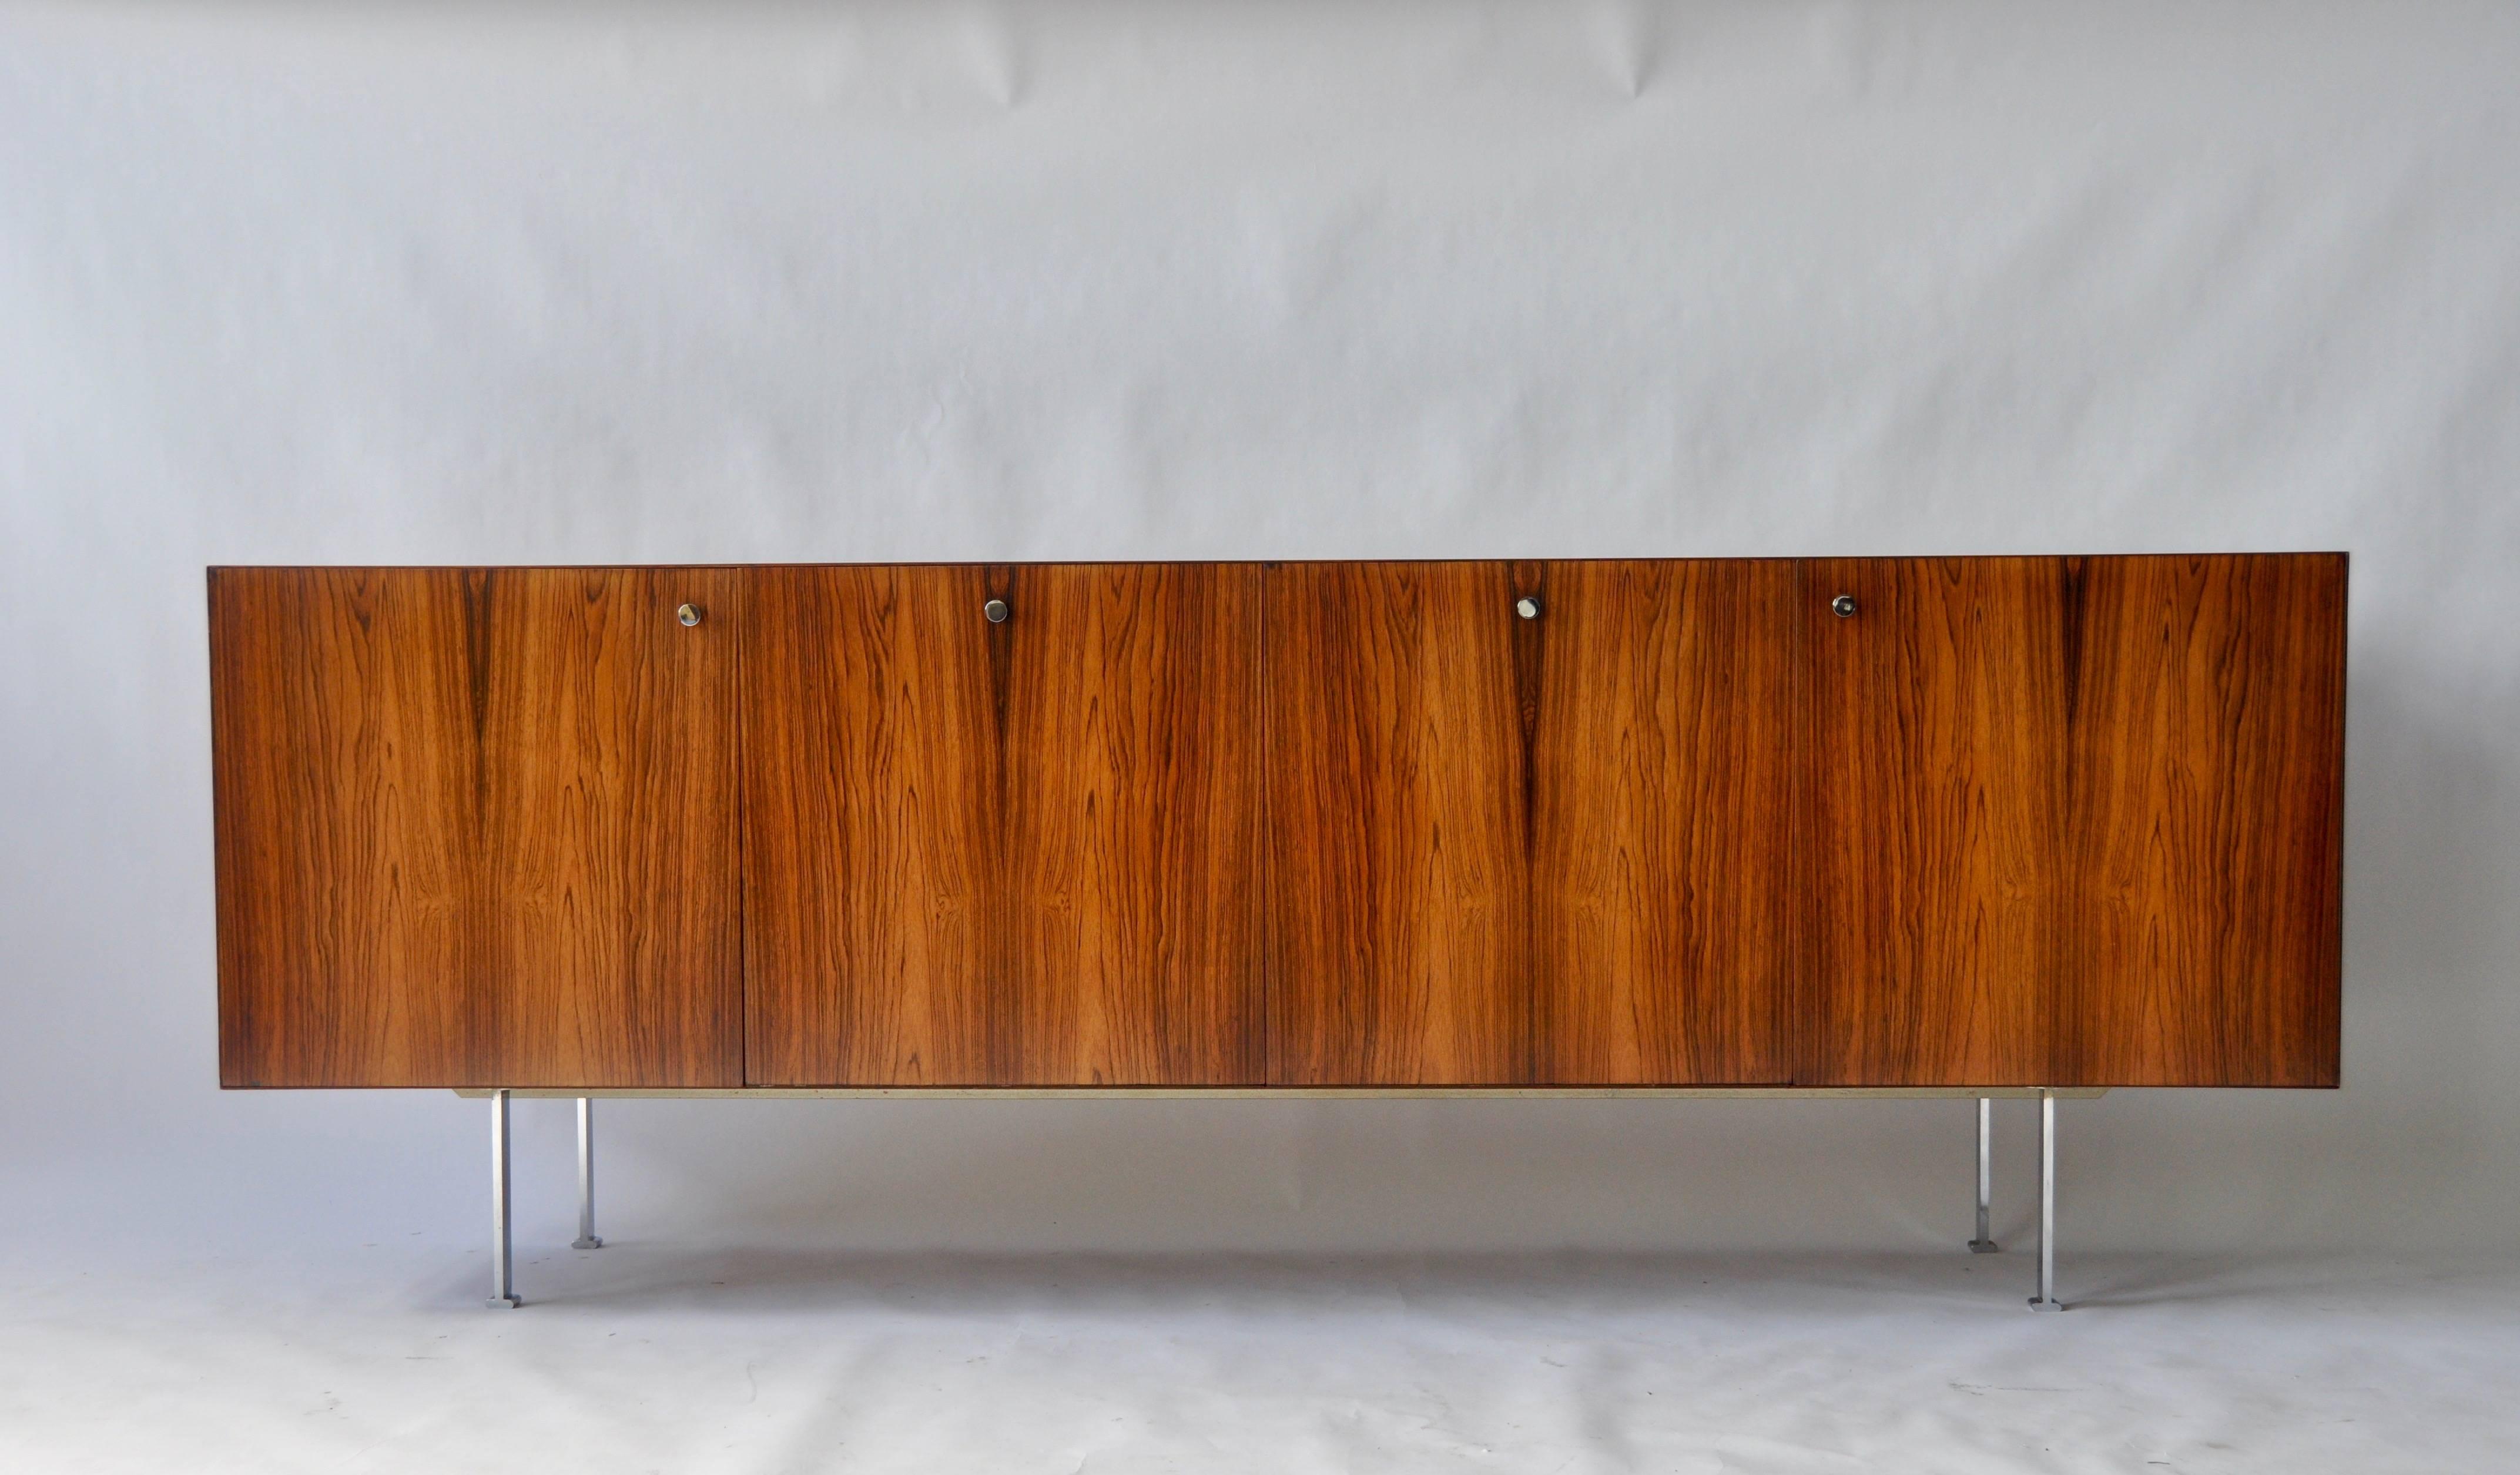 Rosewood Credenza by Poul Norreklit for Georg Petersens, 1960s.